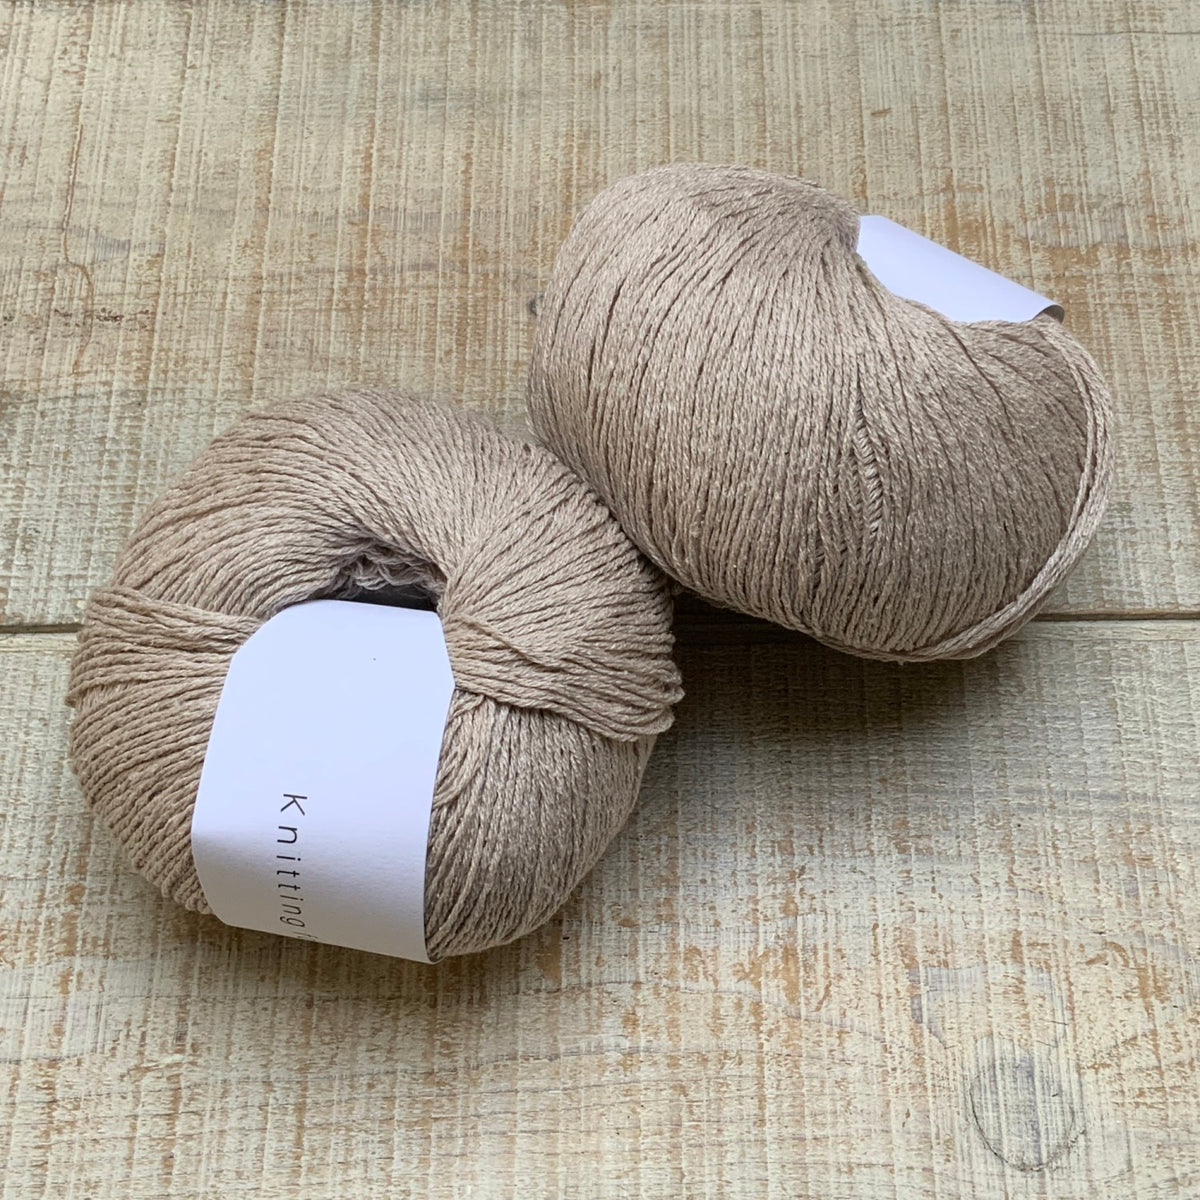 Pure Silk by Knitting for Olive – Smitten Yarn Co.